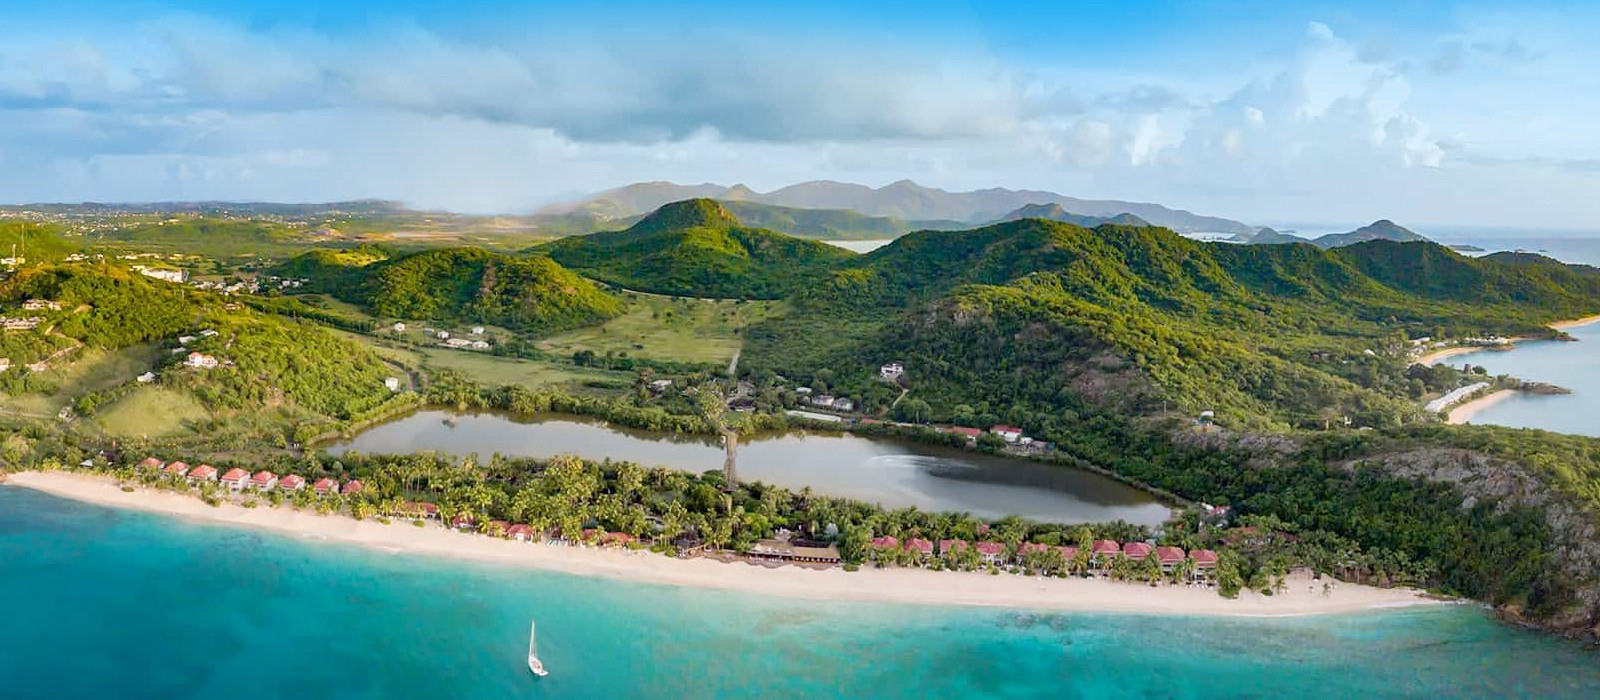 Luxury Antigua Holiday Packages Galley Bay Antigua Header